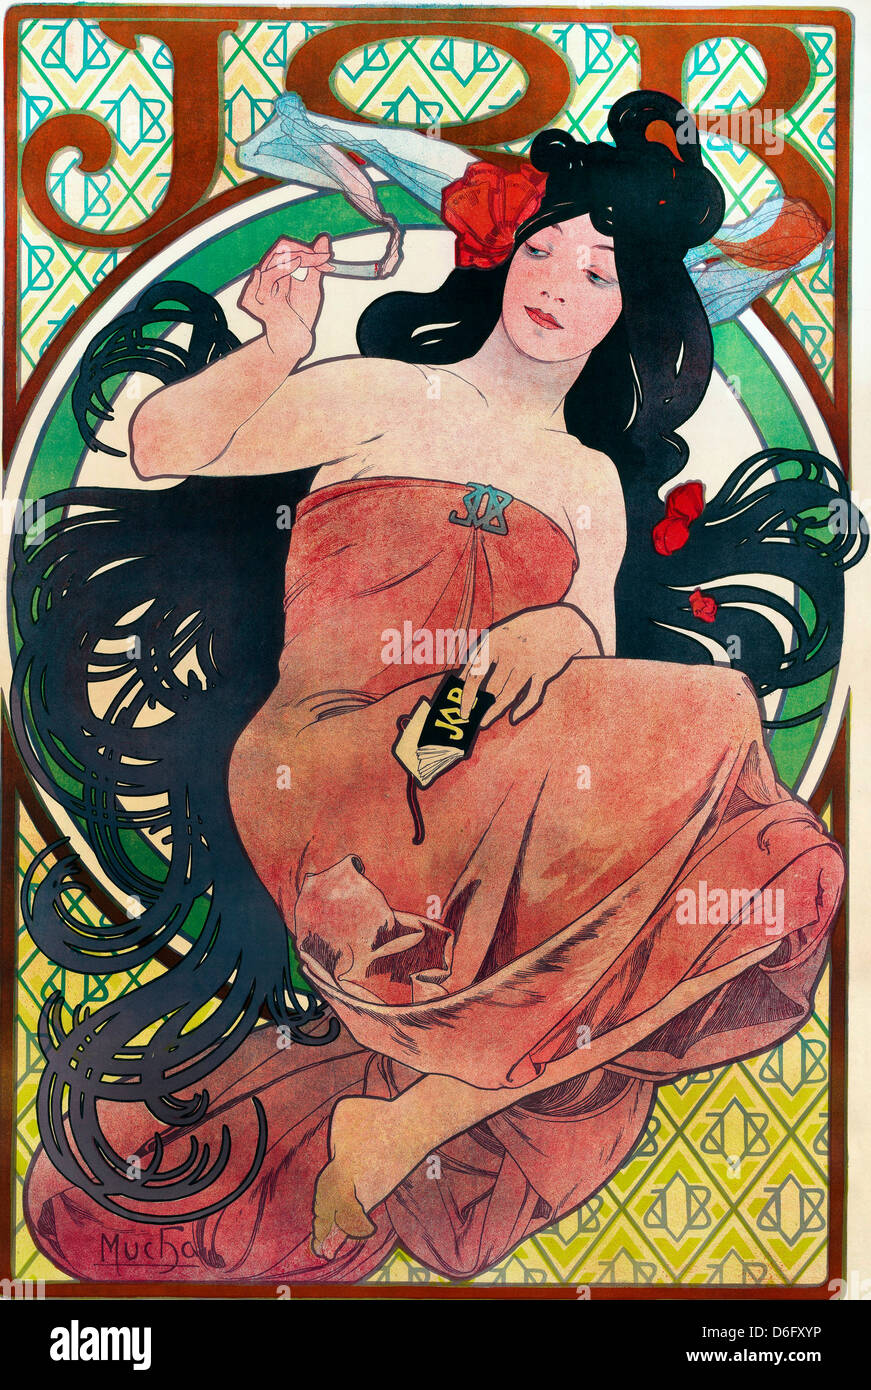 Alfons Mucha, Job 1894 Lithographic poster. National Gallery of Australia, Canberra Stock Photo